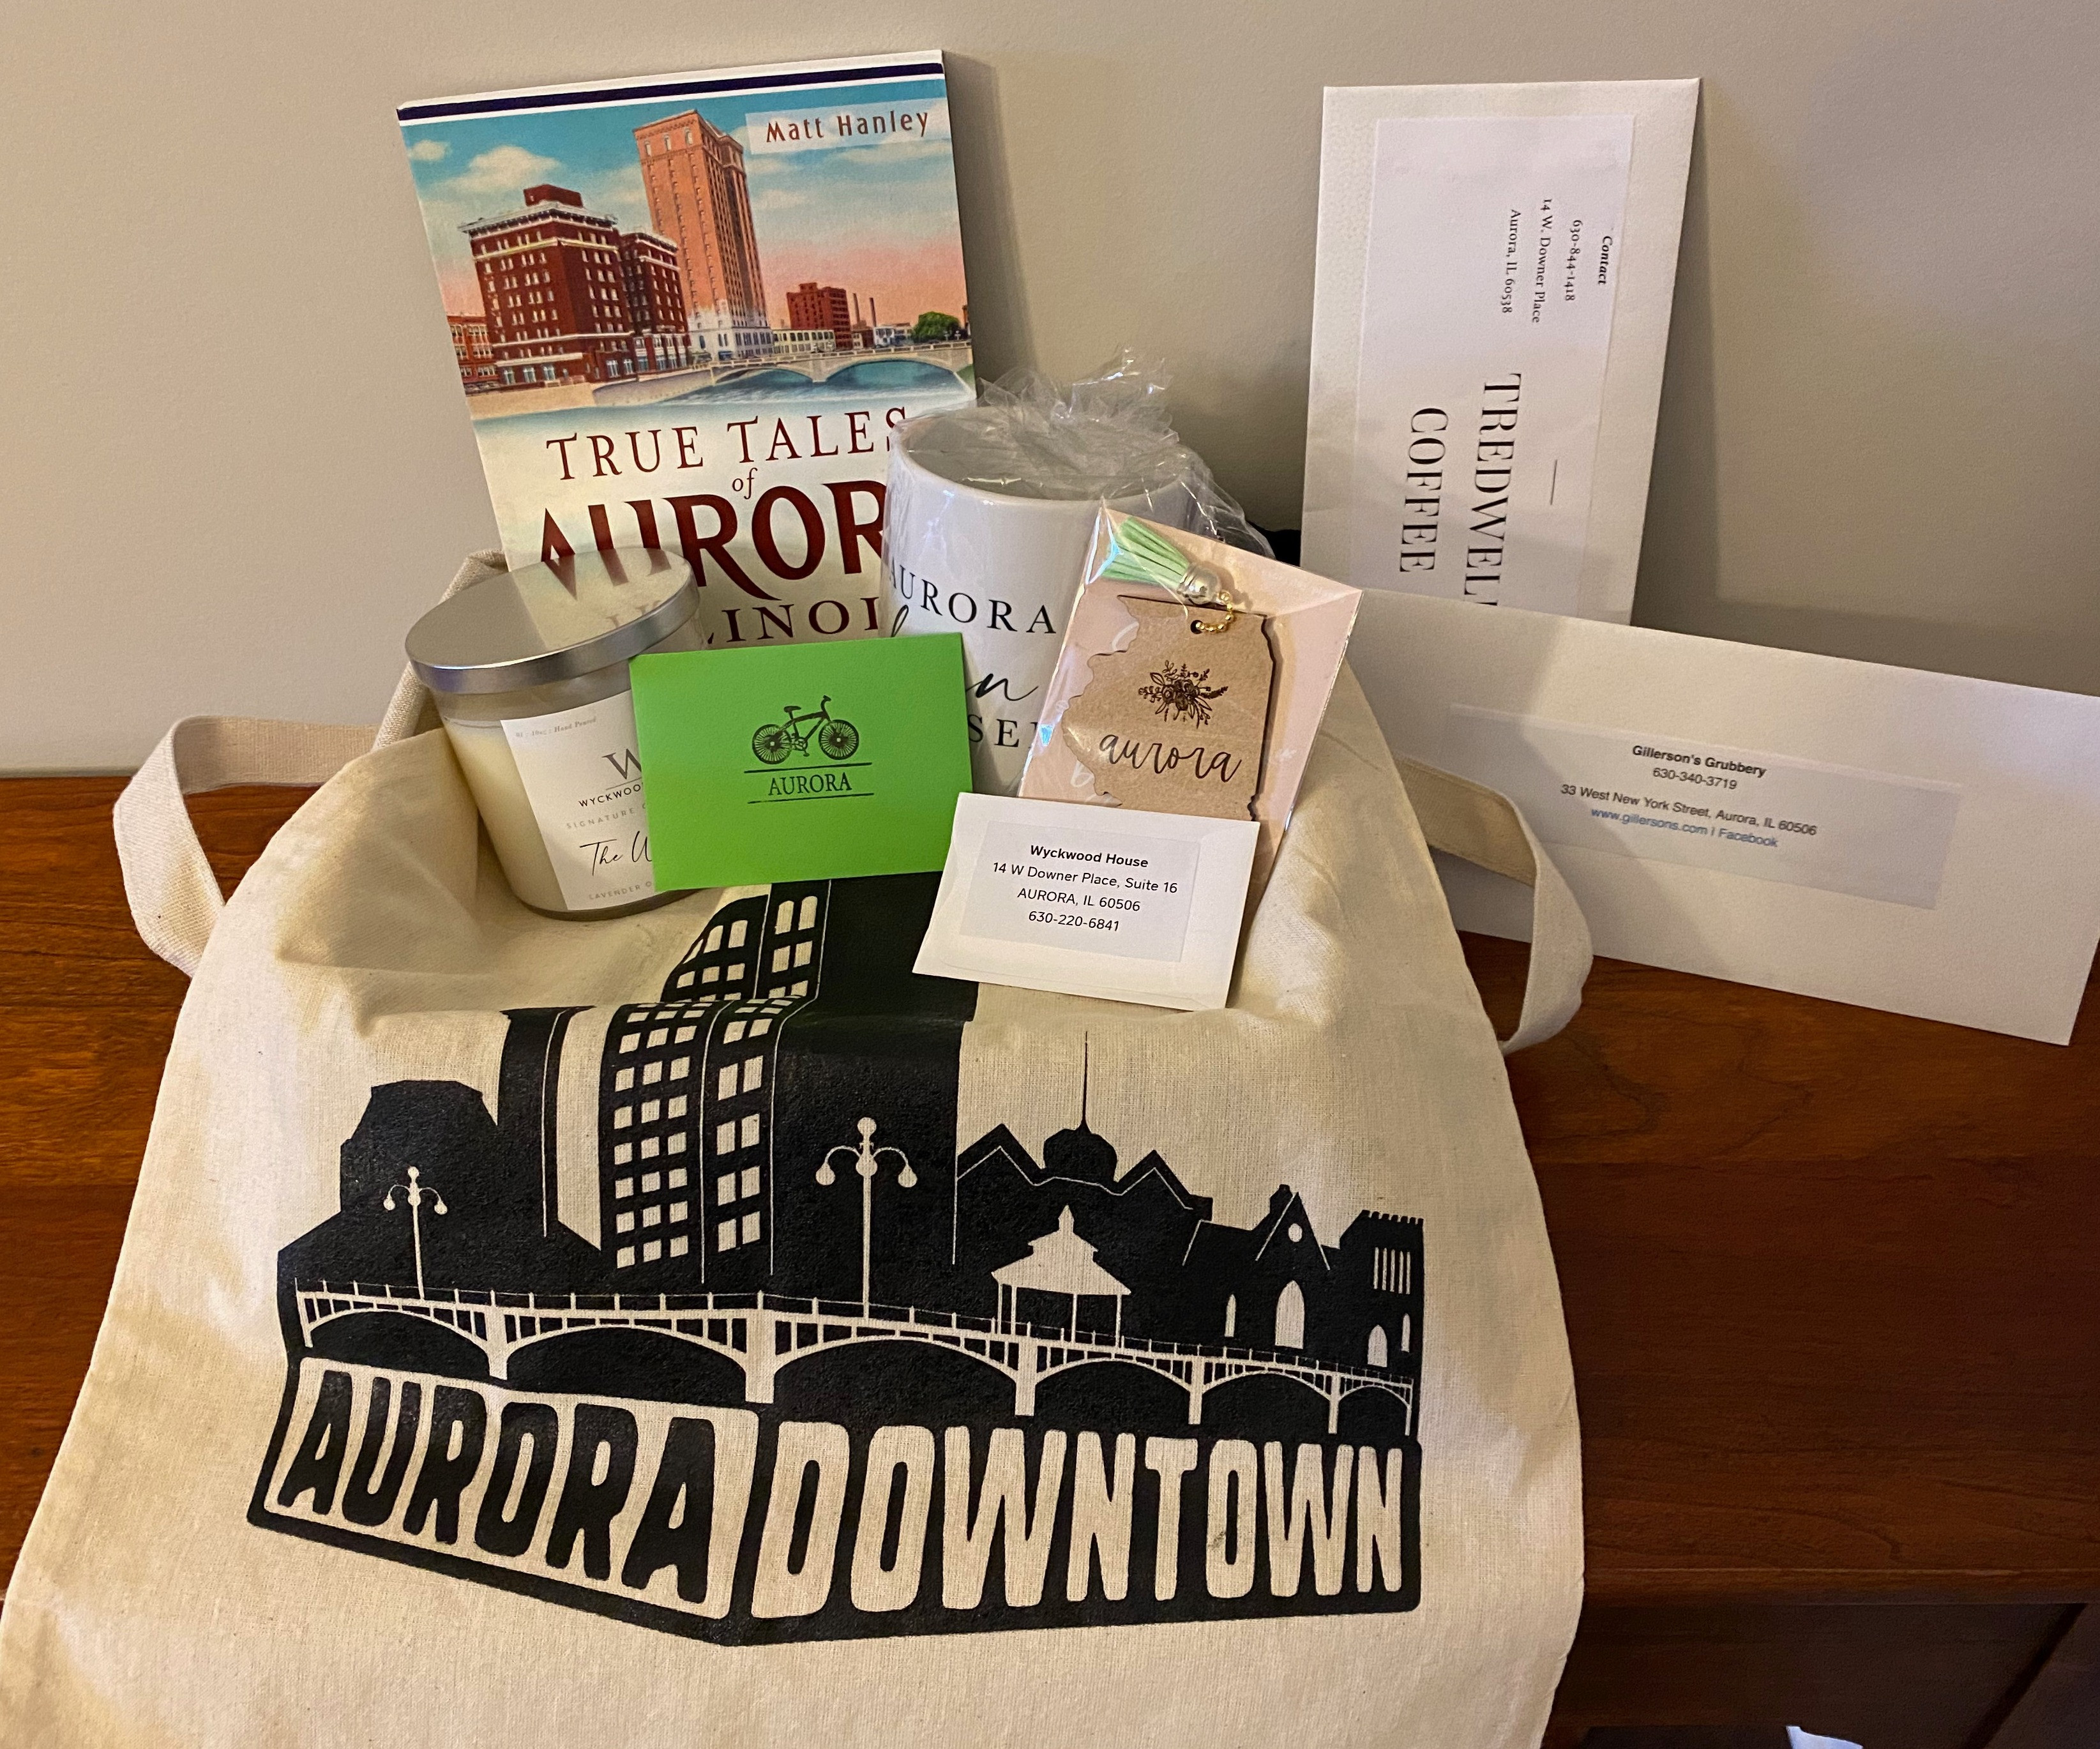 Shop downtown Aurora...Wyckwood House ($50), All Spoked Up ($50), Gillerson's Grubbery ($50), Tredwell Coffee ($20) and Endiro Coffee ($20), a 3'x5' outdoor American flag, and an assortment of City of Aurora memorabilia from Wyckwood House.